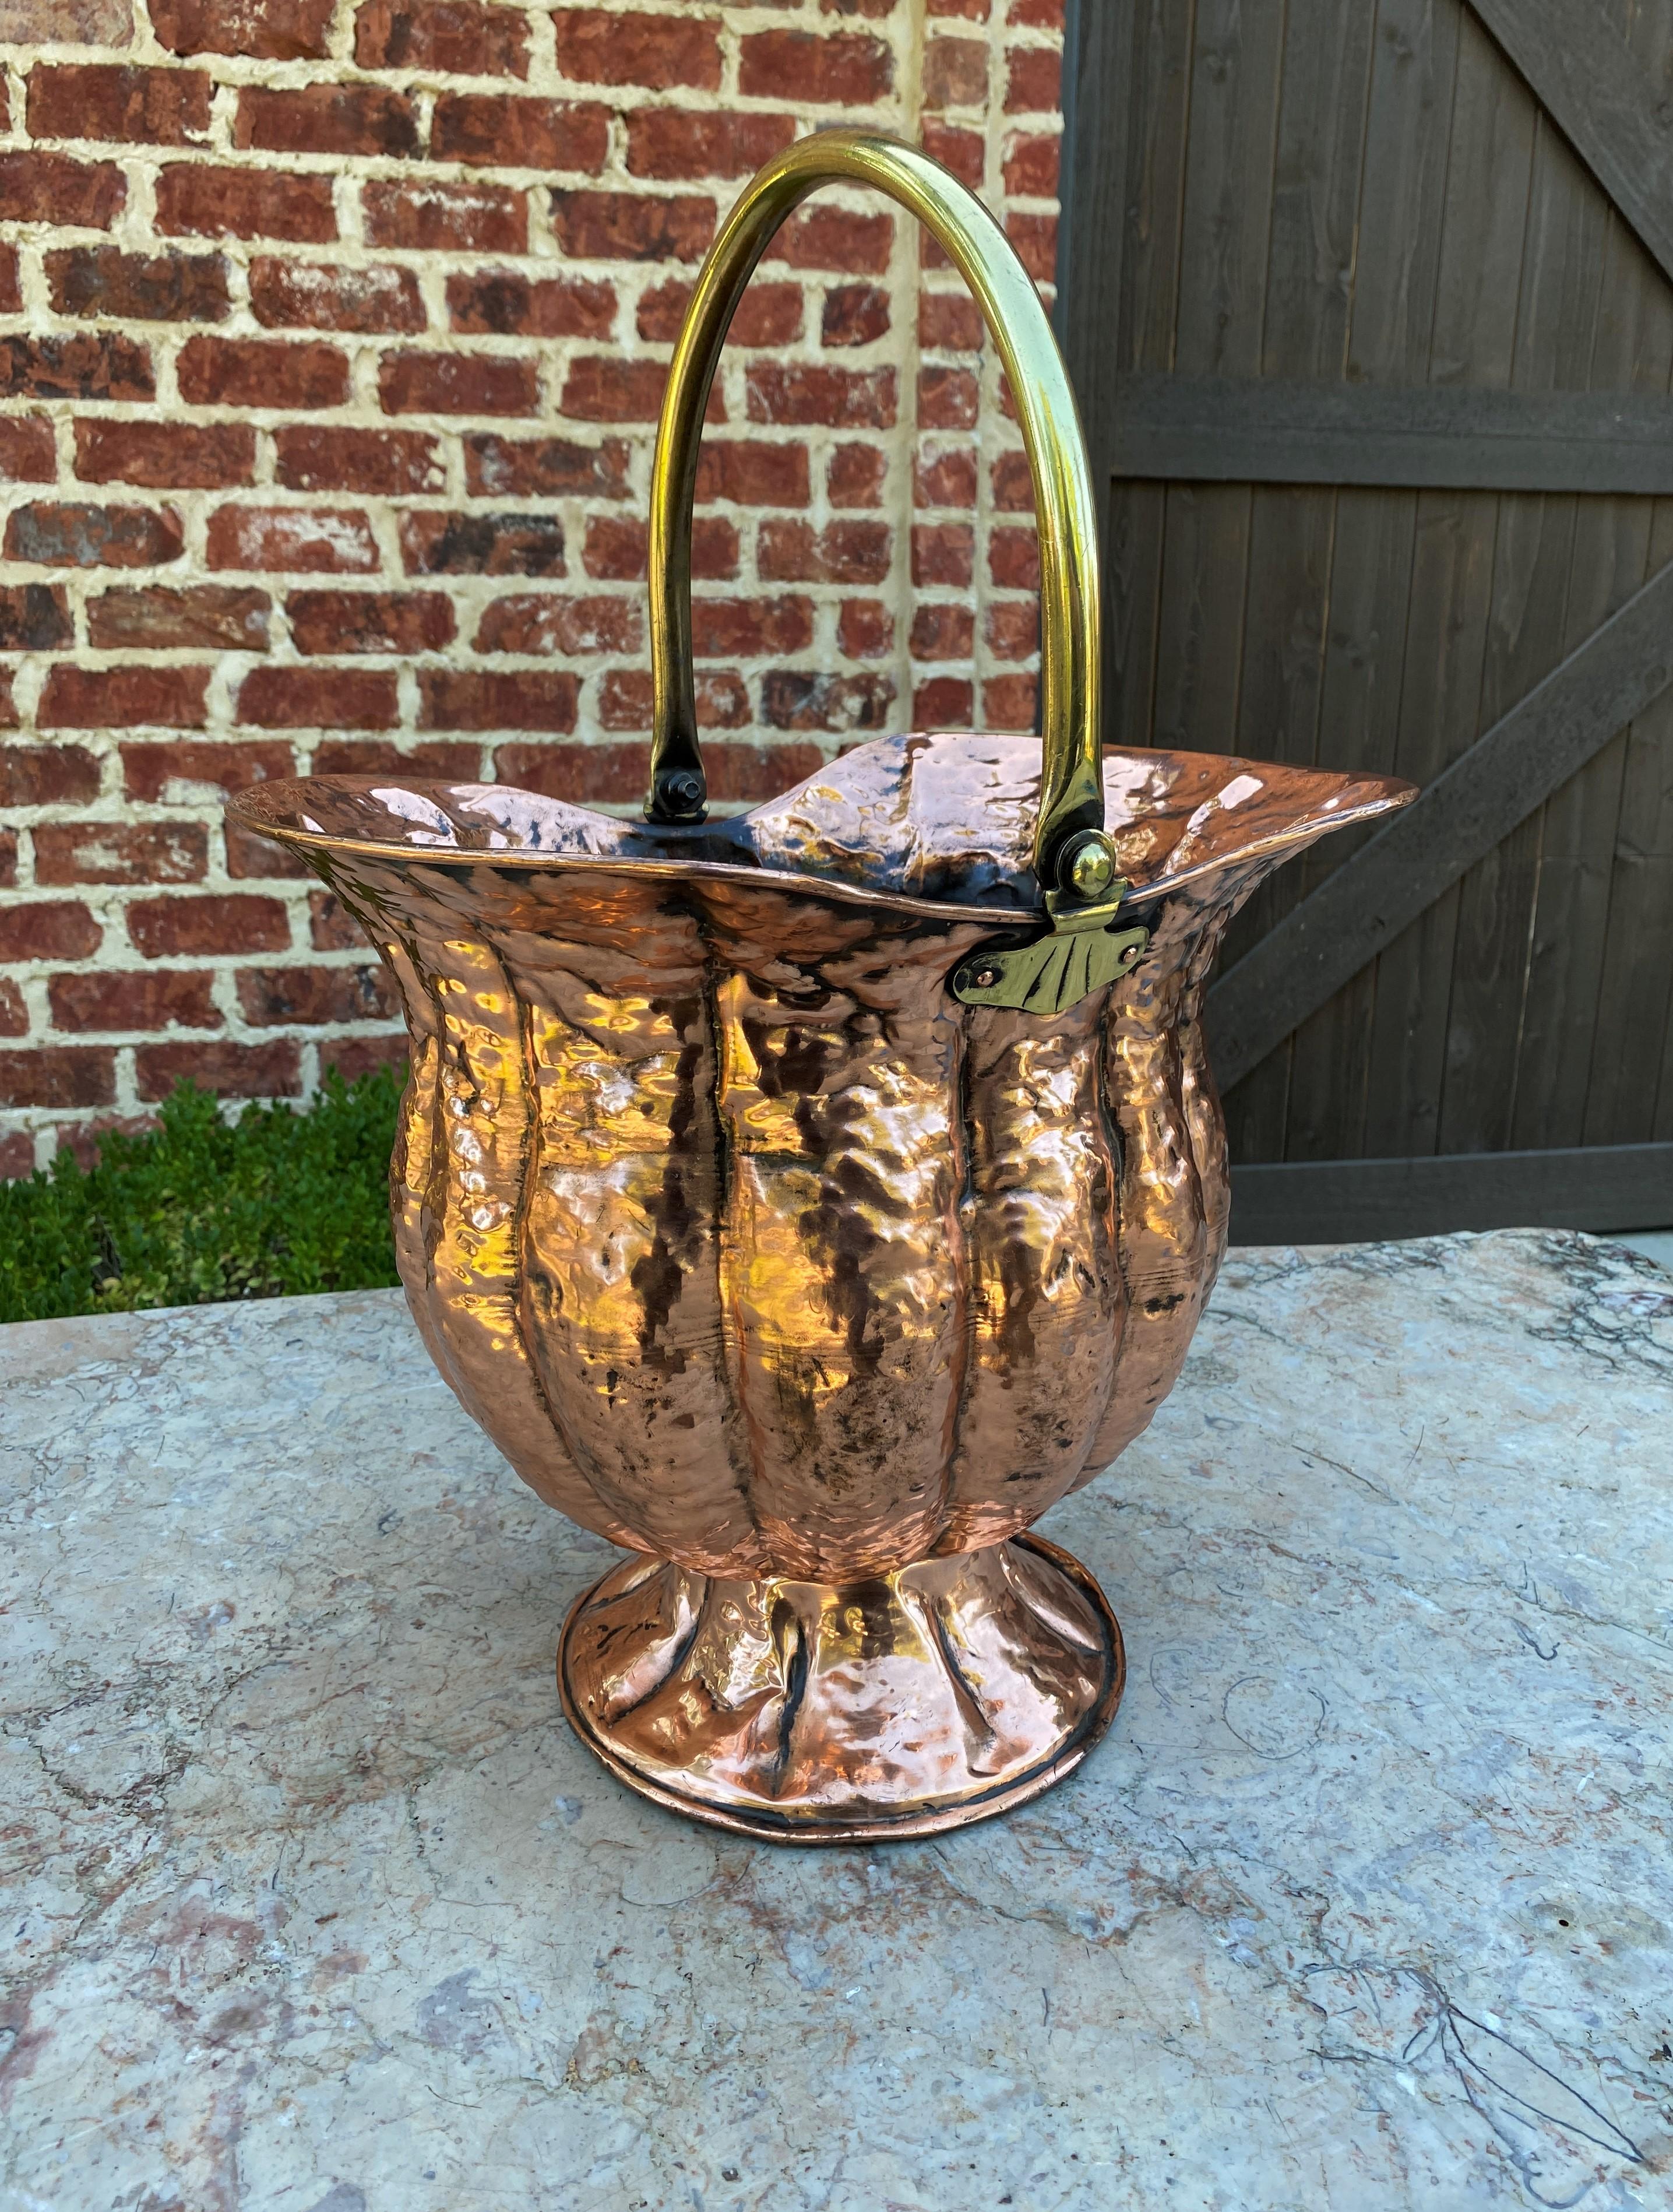 Charming antique English hammered copper basket or planter with brass handle~~c. 1900 
Popular decorative accent for a fireplace, hearth or kitchen in today's French Country, English cottage or farmhouse home

20